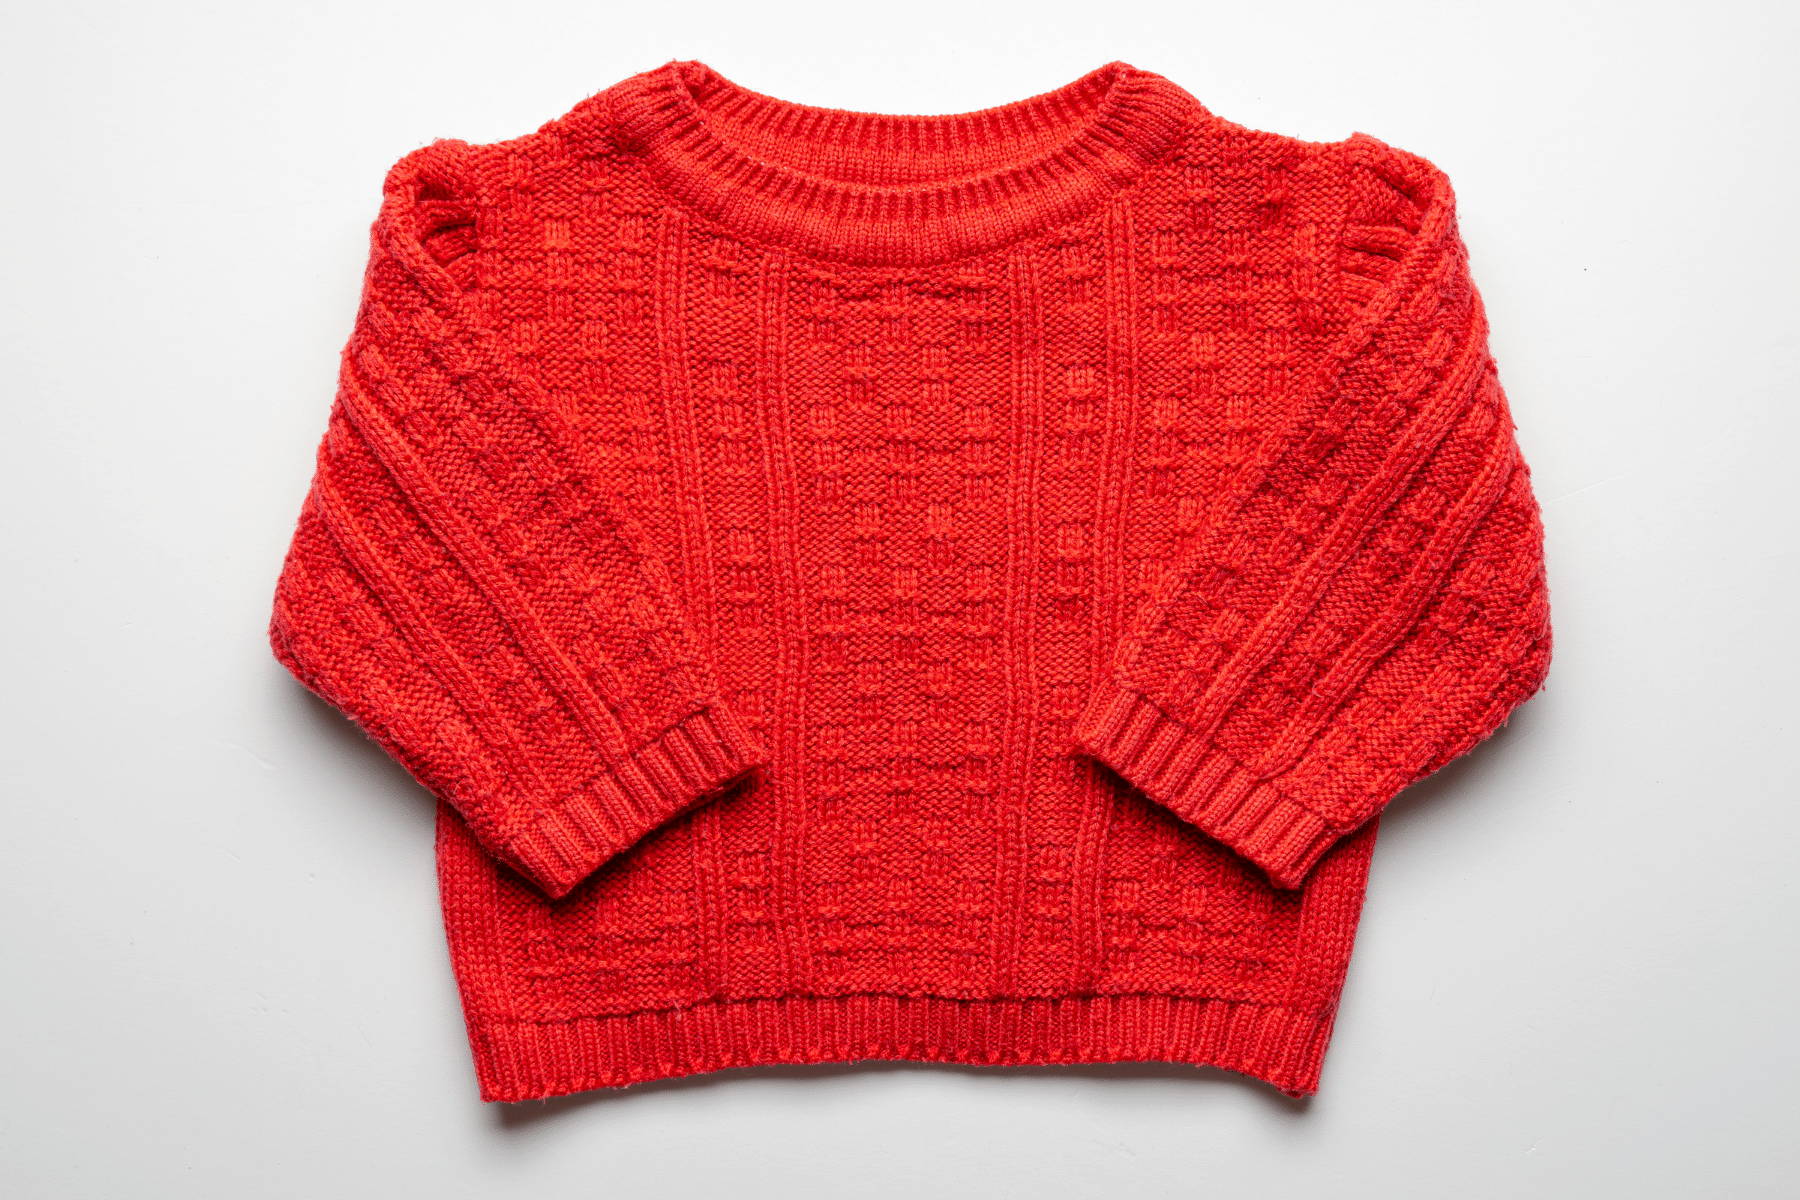 Finished Knit Sweater